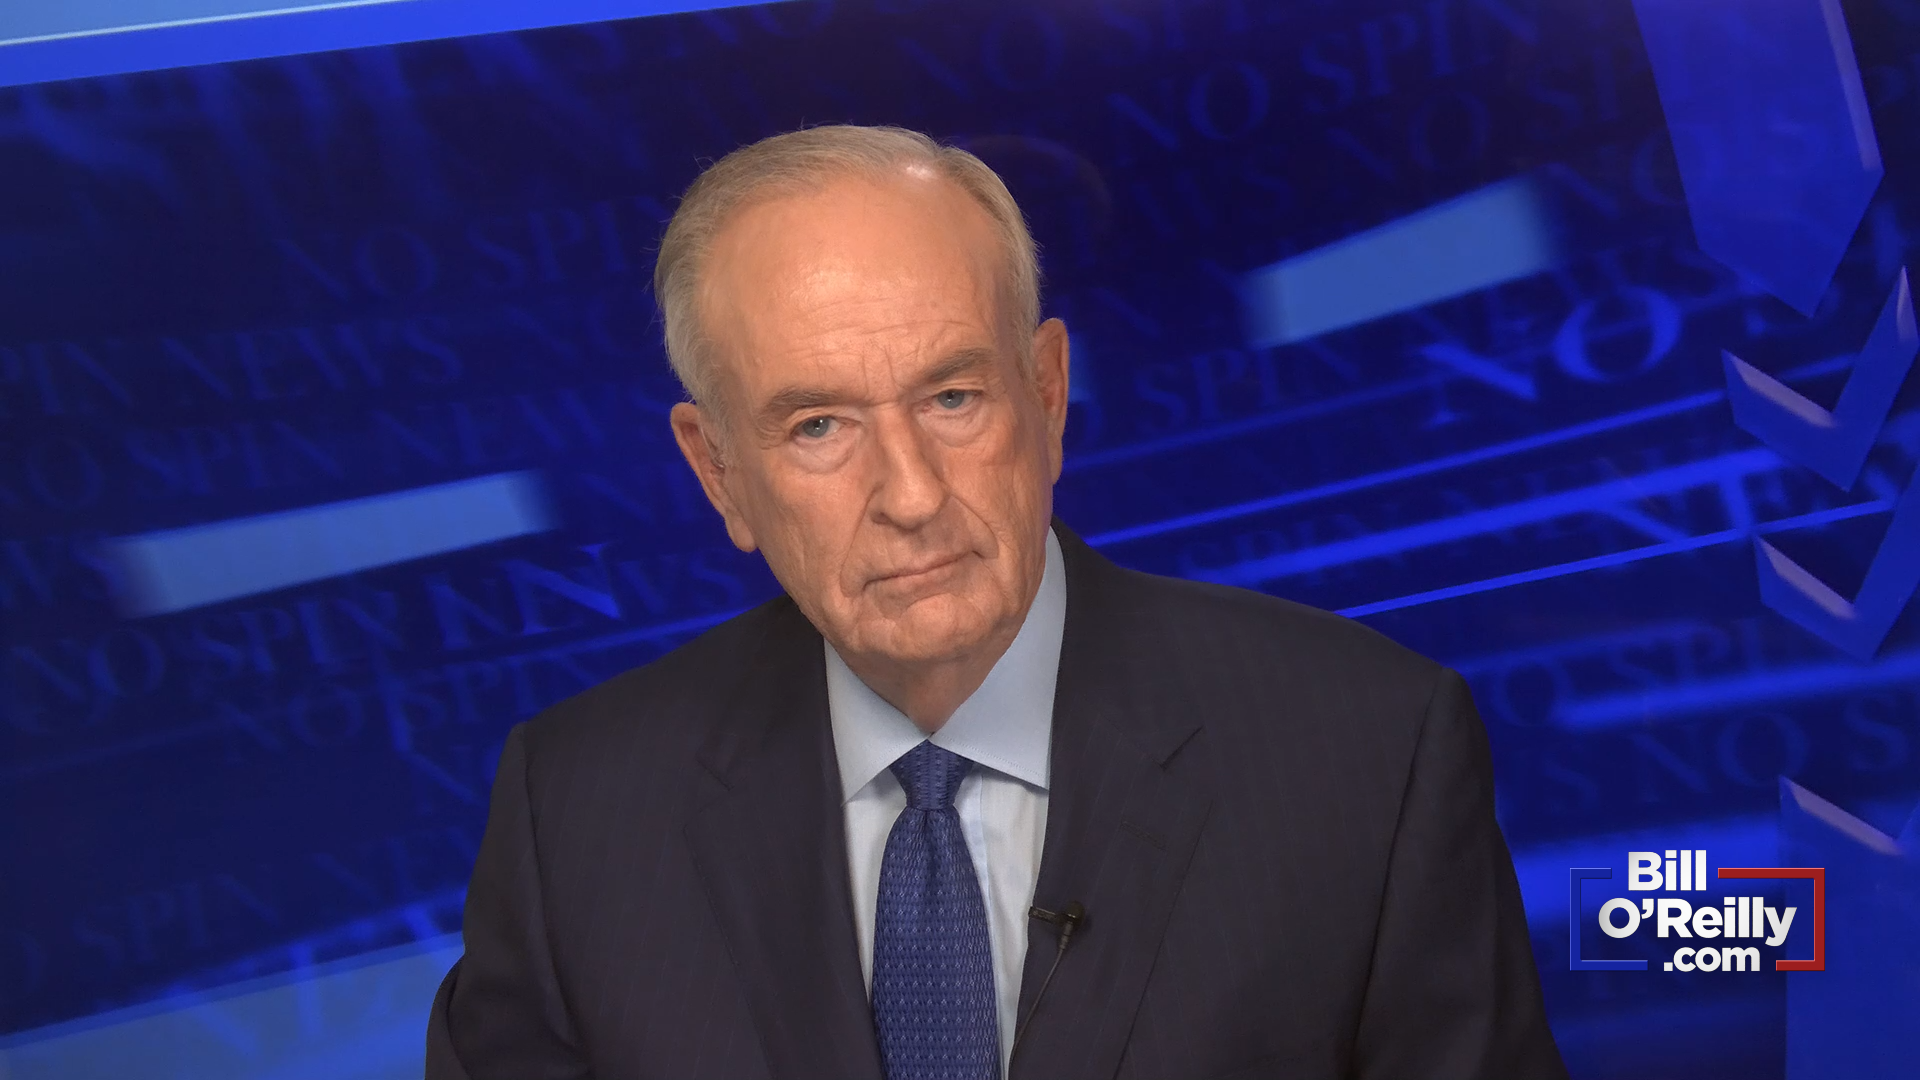 O'Reilly on the Changing Political Landscape